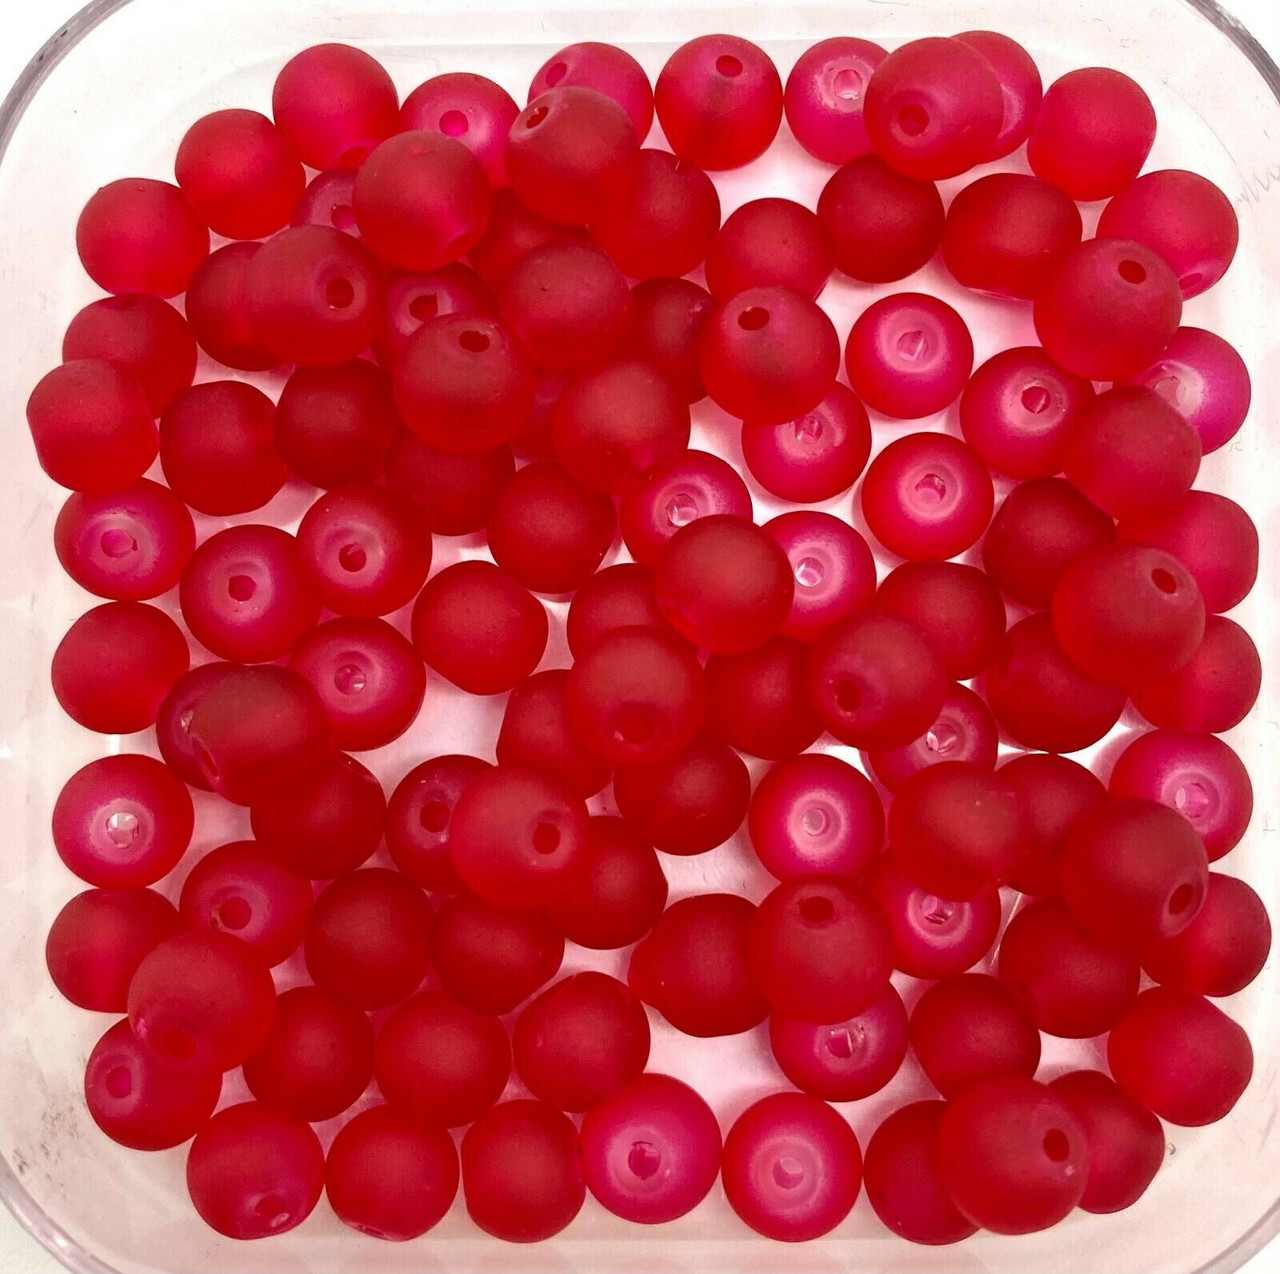 8mm Frosted Glass Beads - Berry Red, approx 50 beads